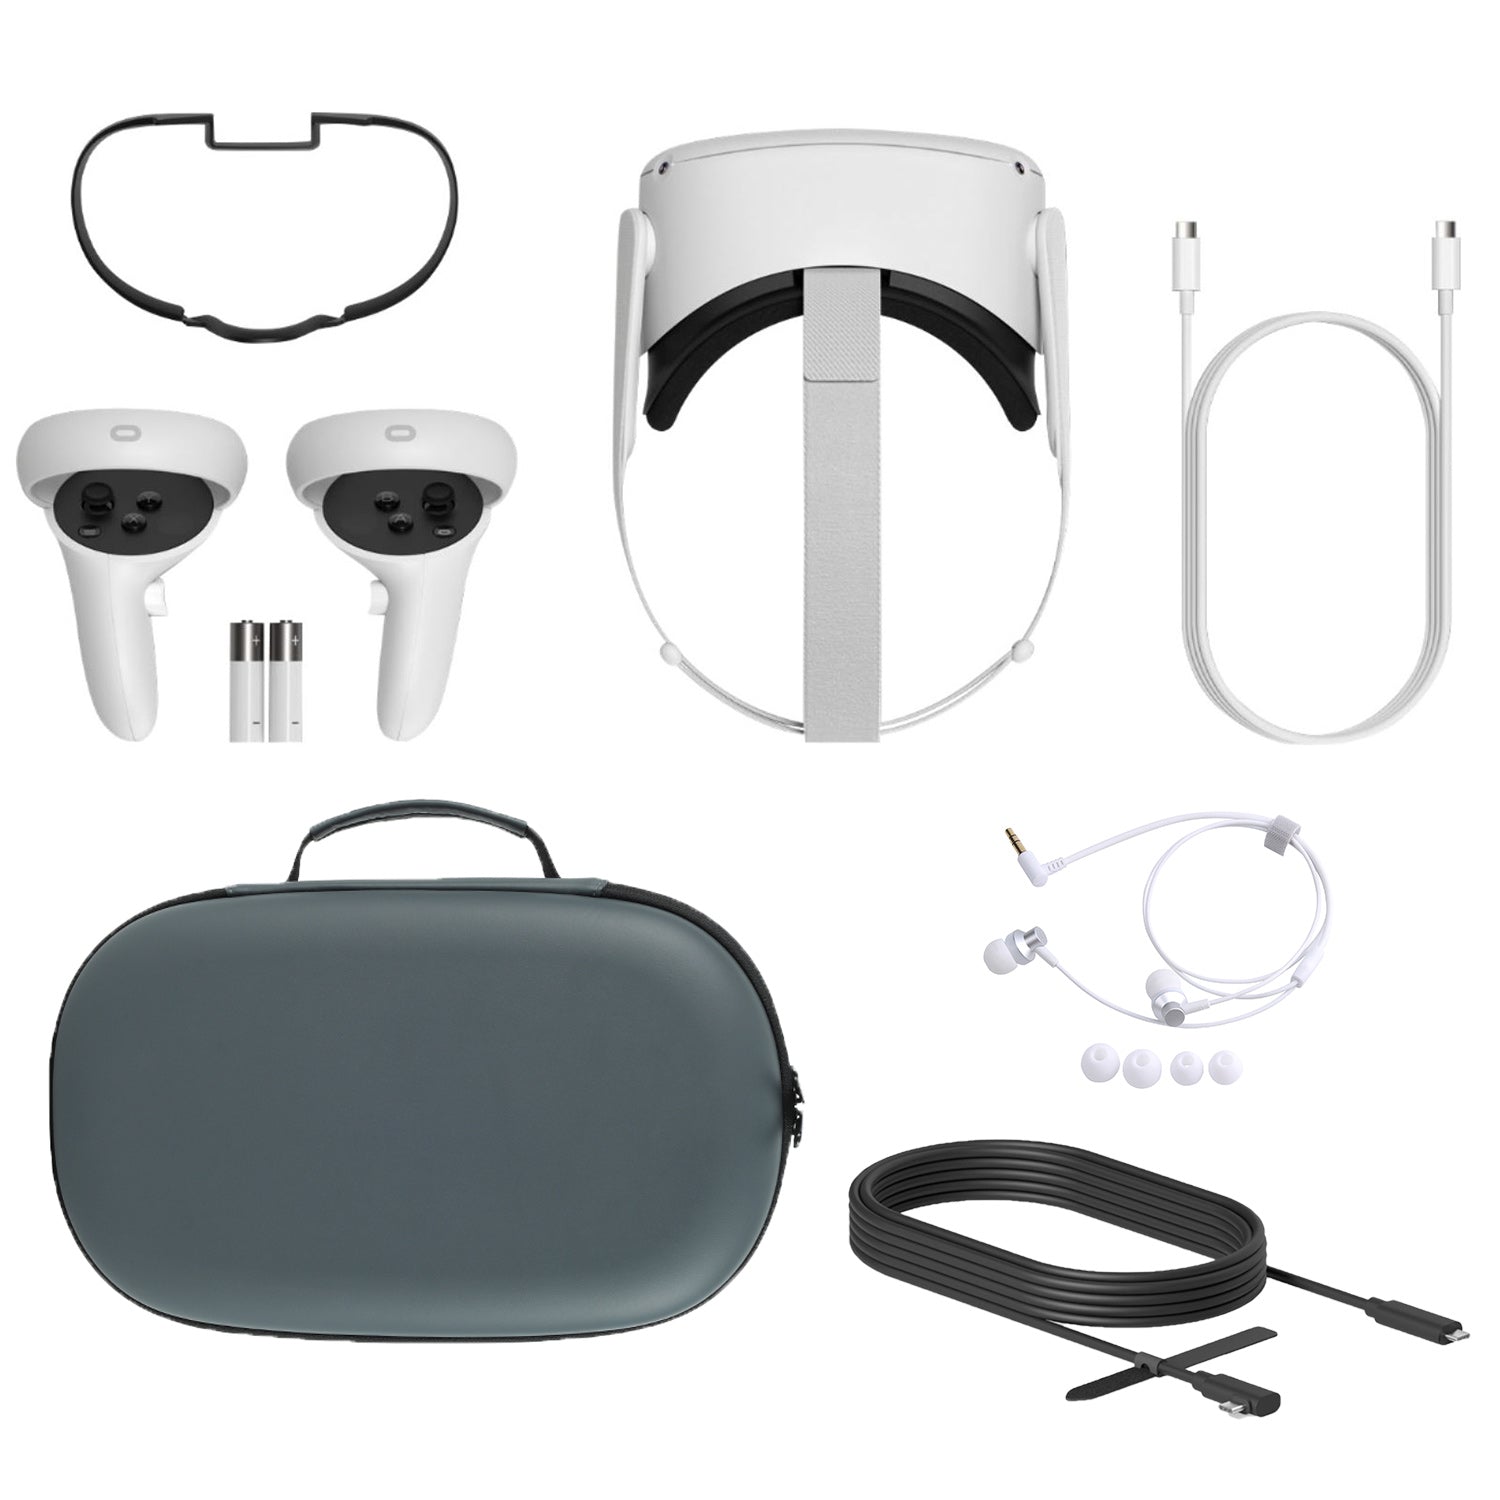 2020 Oculus Quest 2 All-In-One VR Headset, Touch Controllers, 128GB SSD, 1832x1920 up to 90 Hz Refresh Rate LCD, Glasses Compatible, 3D Audio, Mytrix Carrying Case, Earphone, Oculus Link Cable (3M)